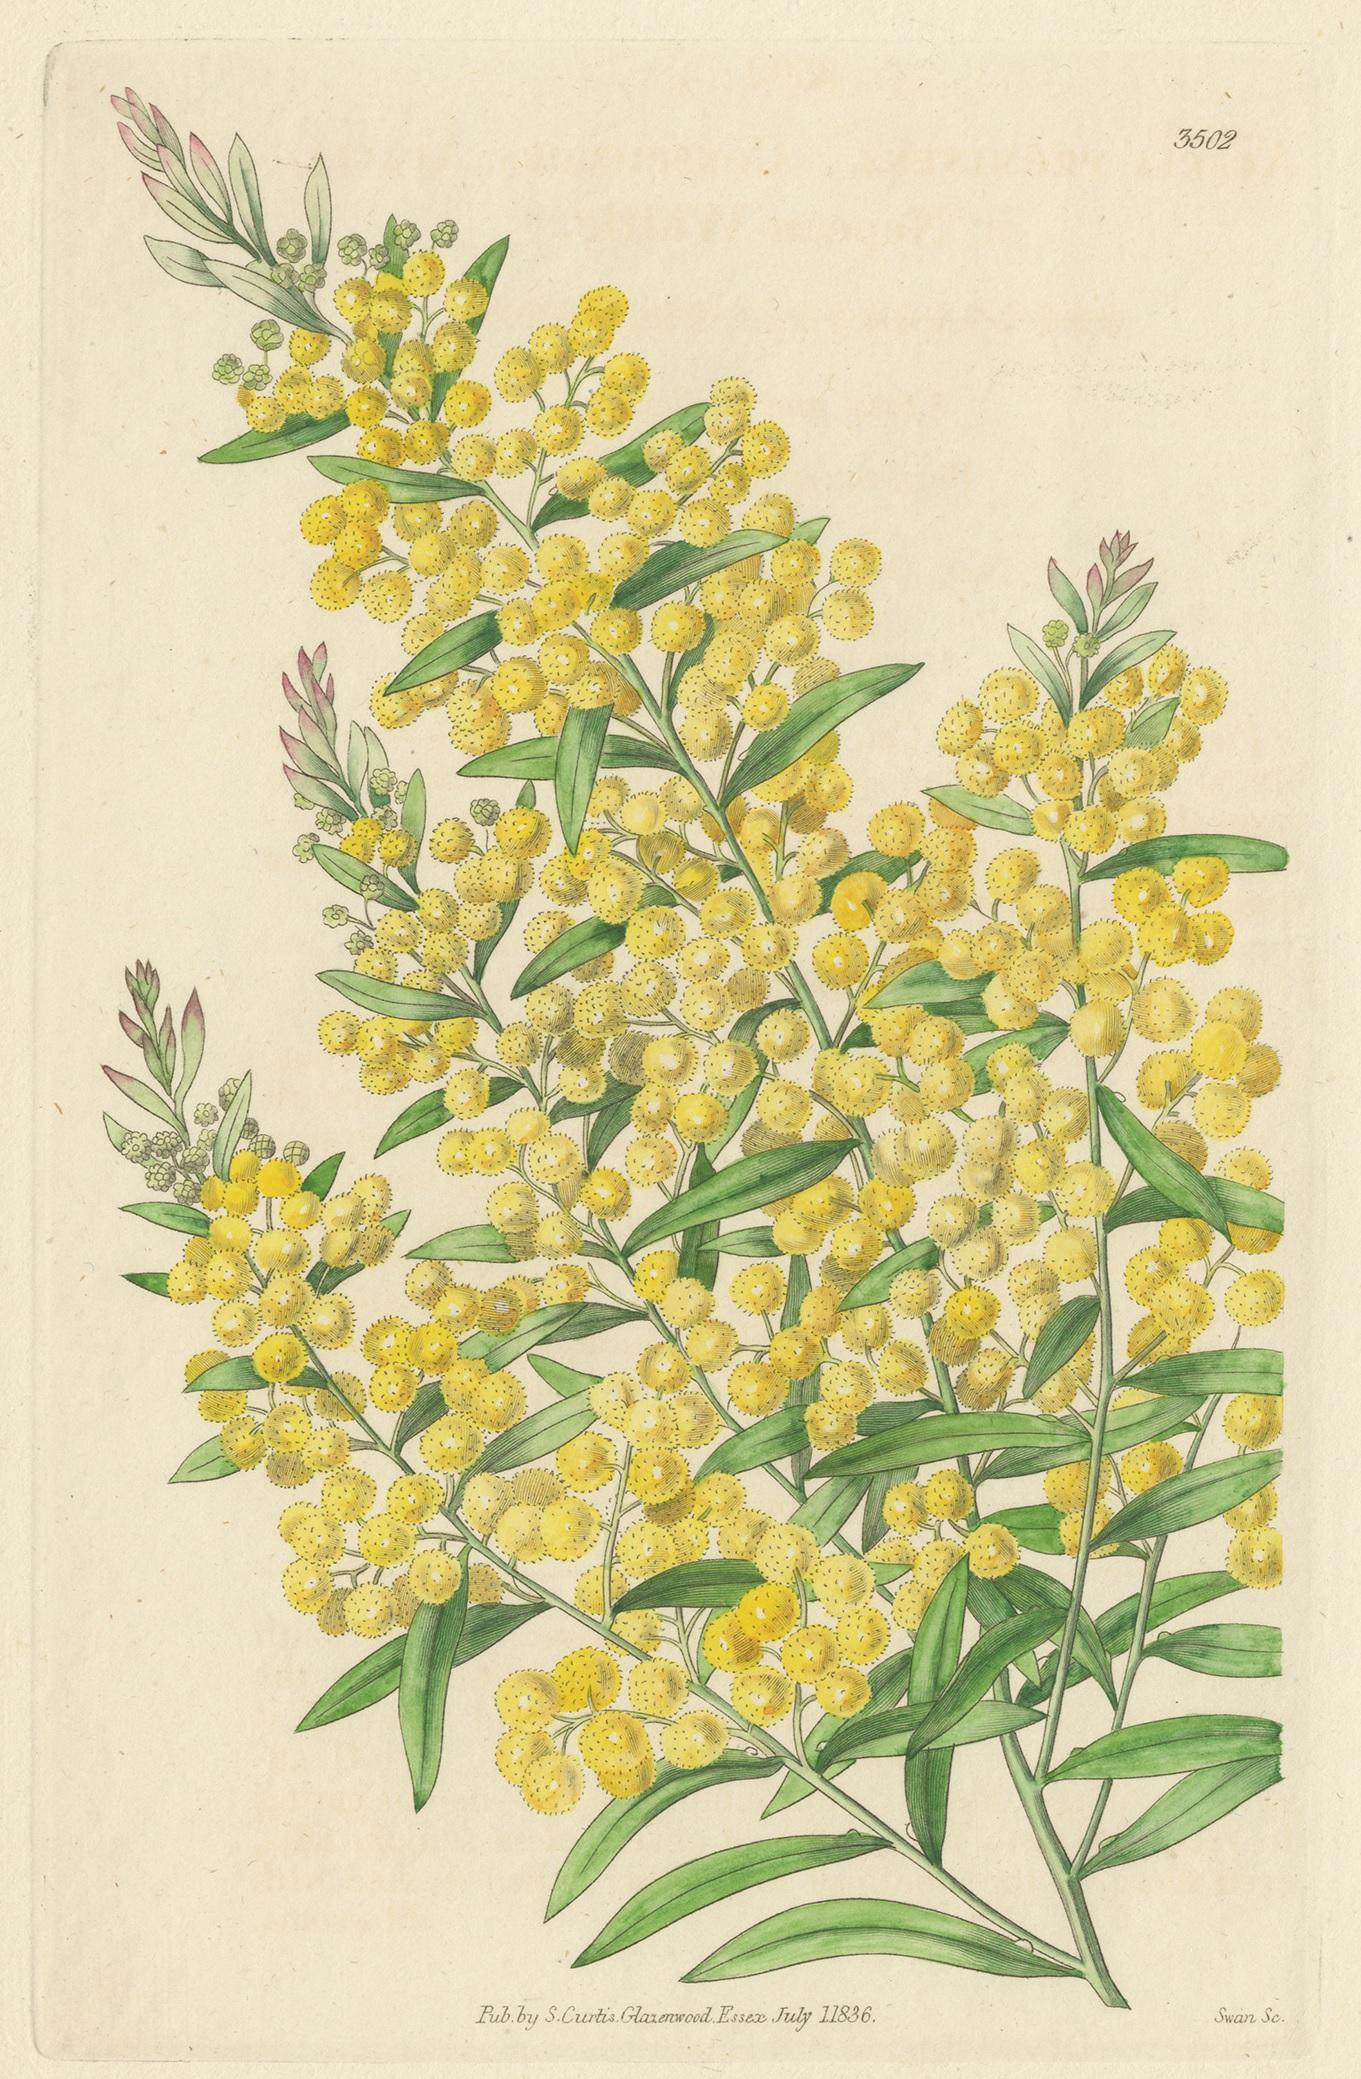 Antique botany print titled 'Acacia Prominens'. Engraving of the acacia prominens, also known as golden rain wattle, goldenrain wattle, Gosford wattle or grey sally. This print originates from 'Curtis's Botanical Magazine'.